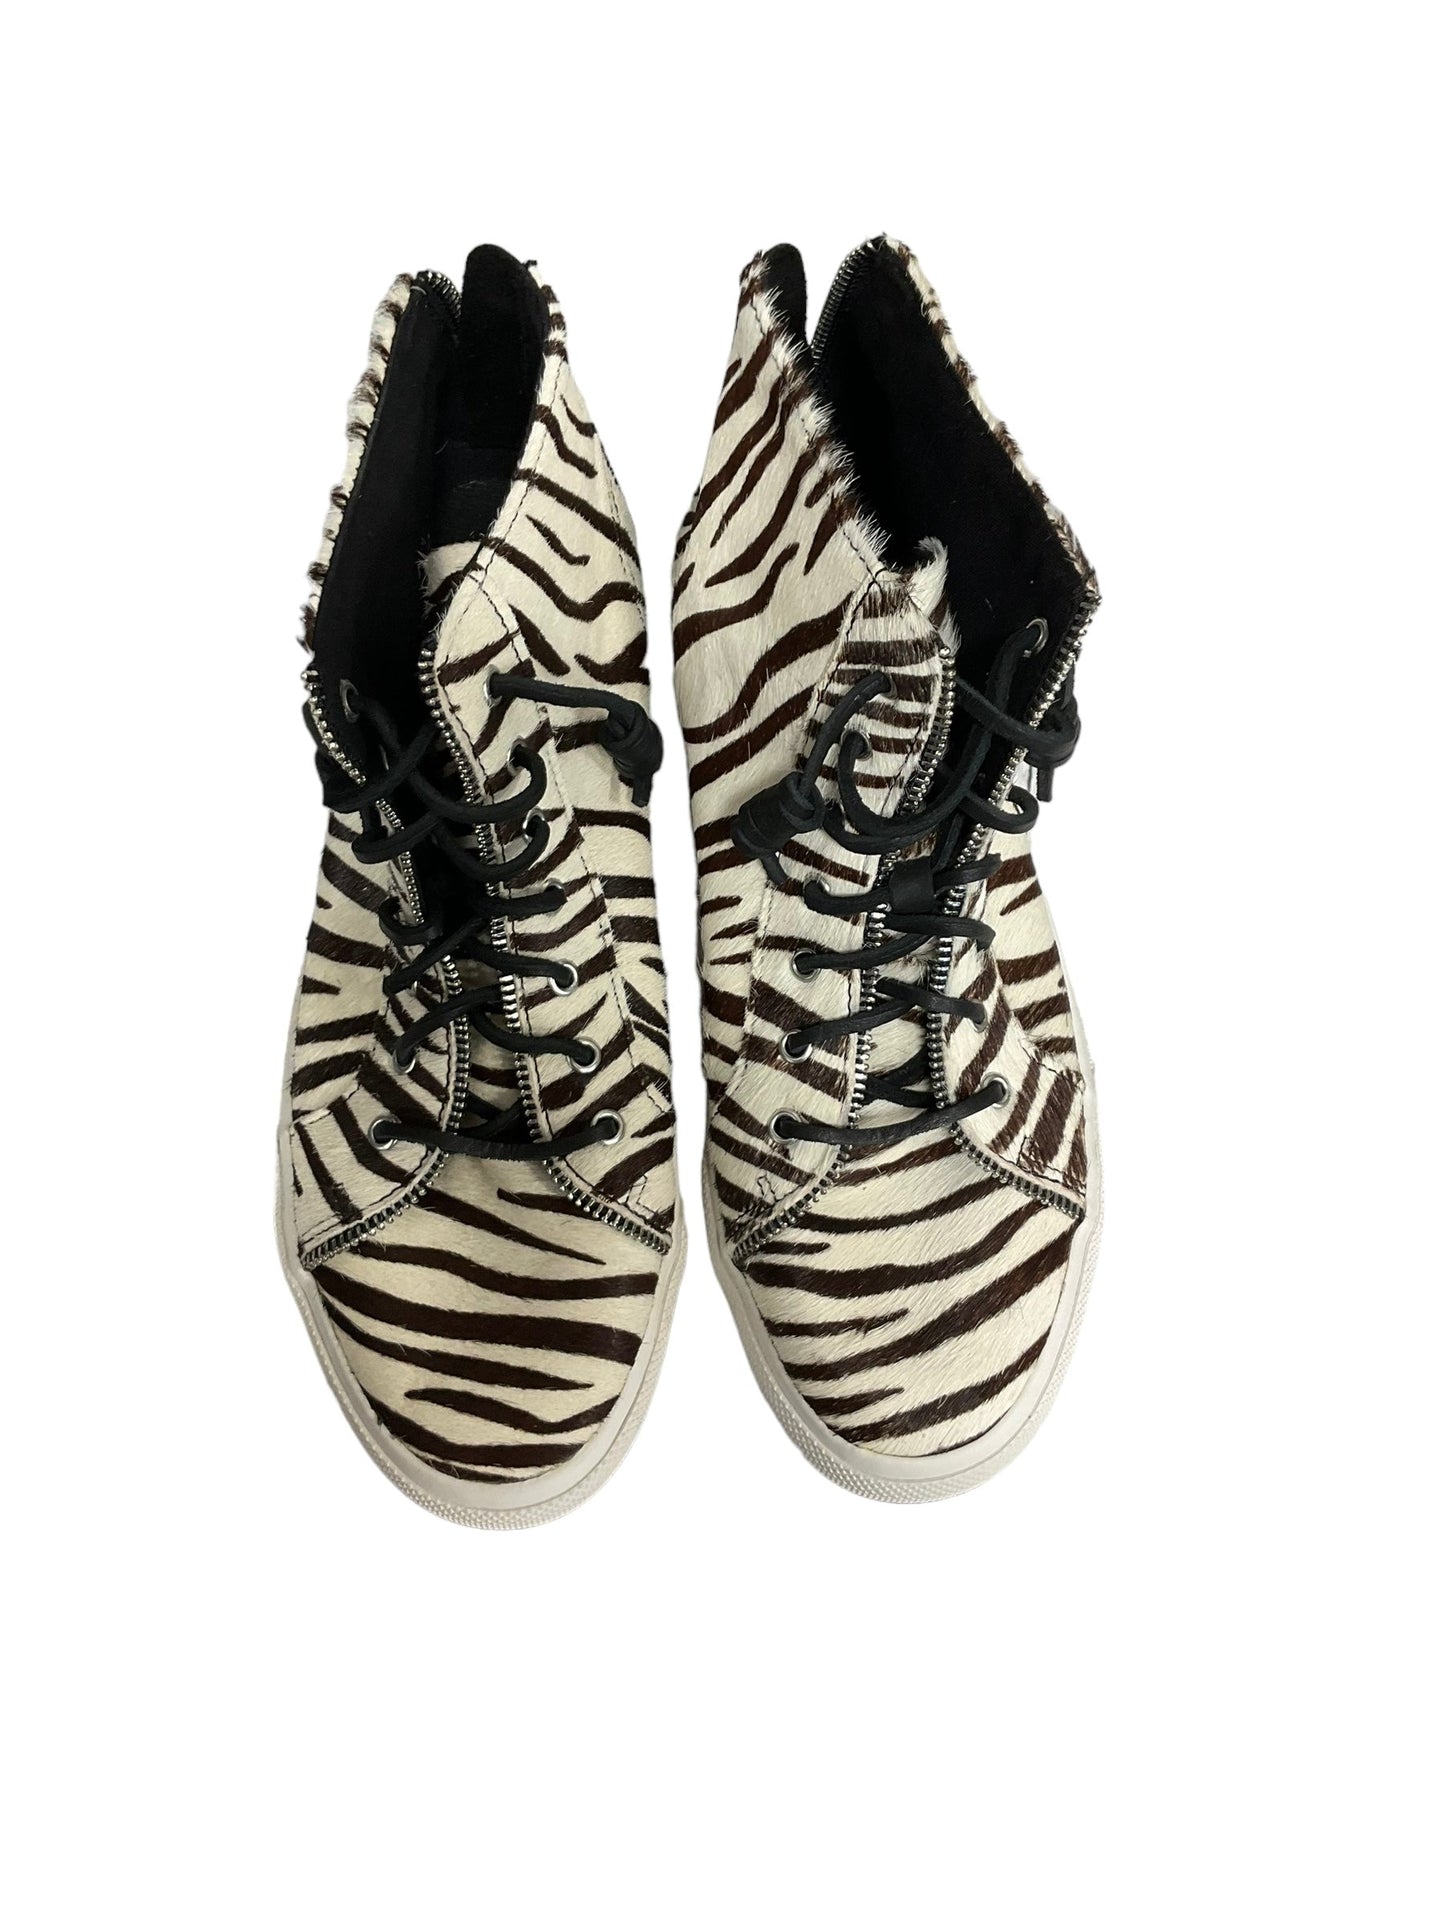 Zebra Print Shoes Athletic Sperry, Size 10